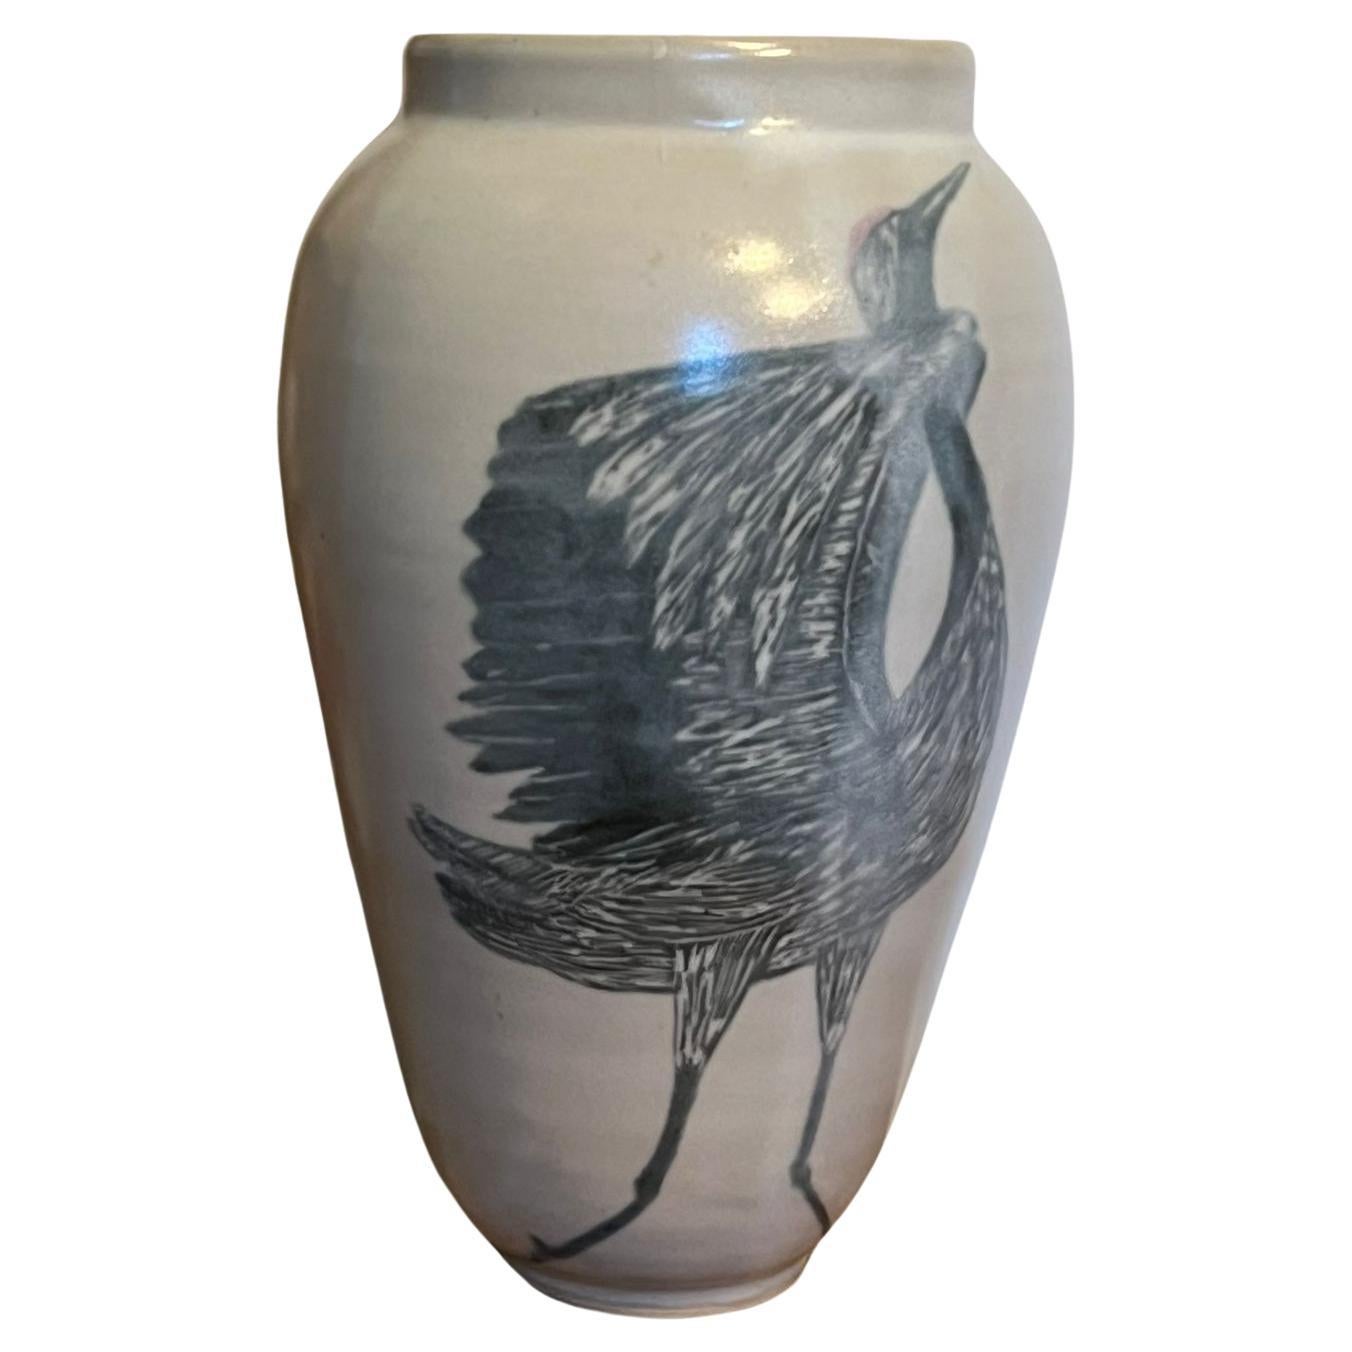 Stamped Vintage Large Hand Painted Bird Vase Pottery.